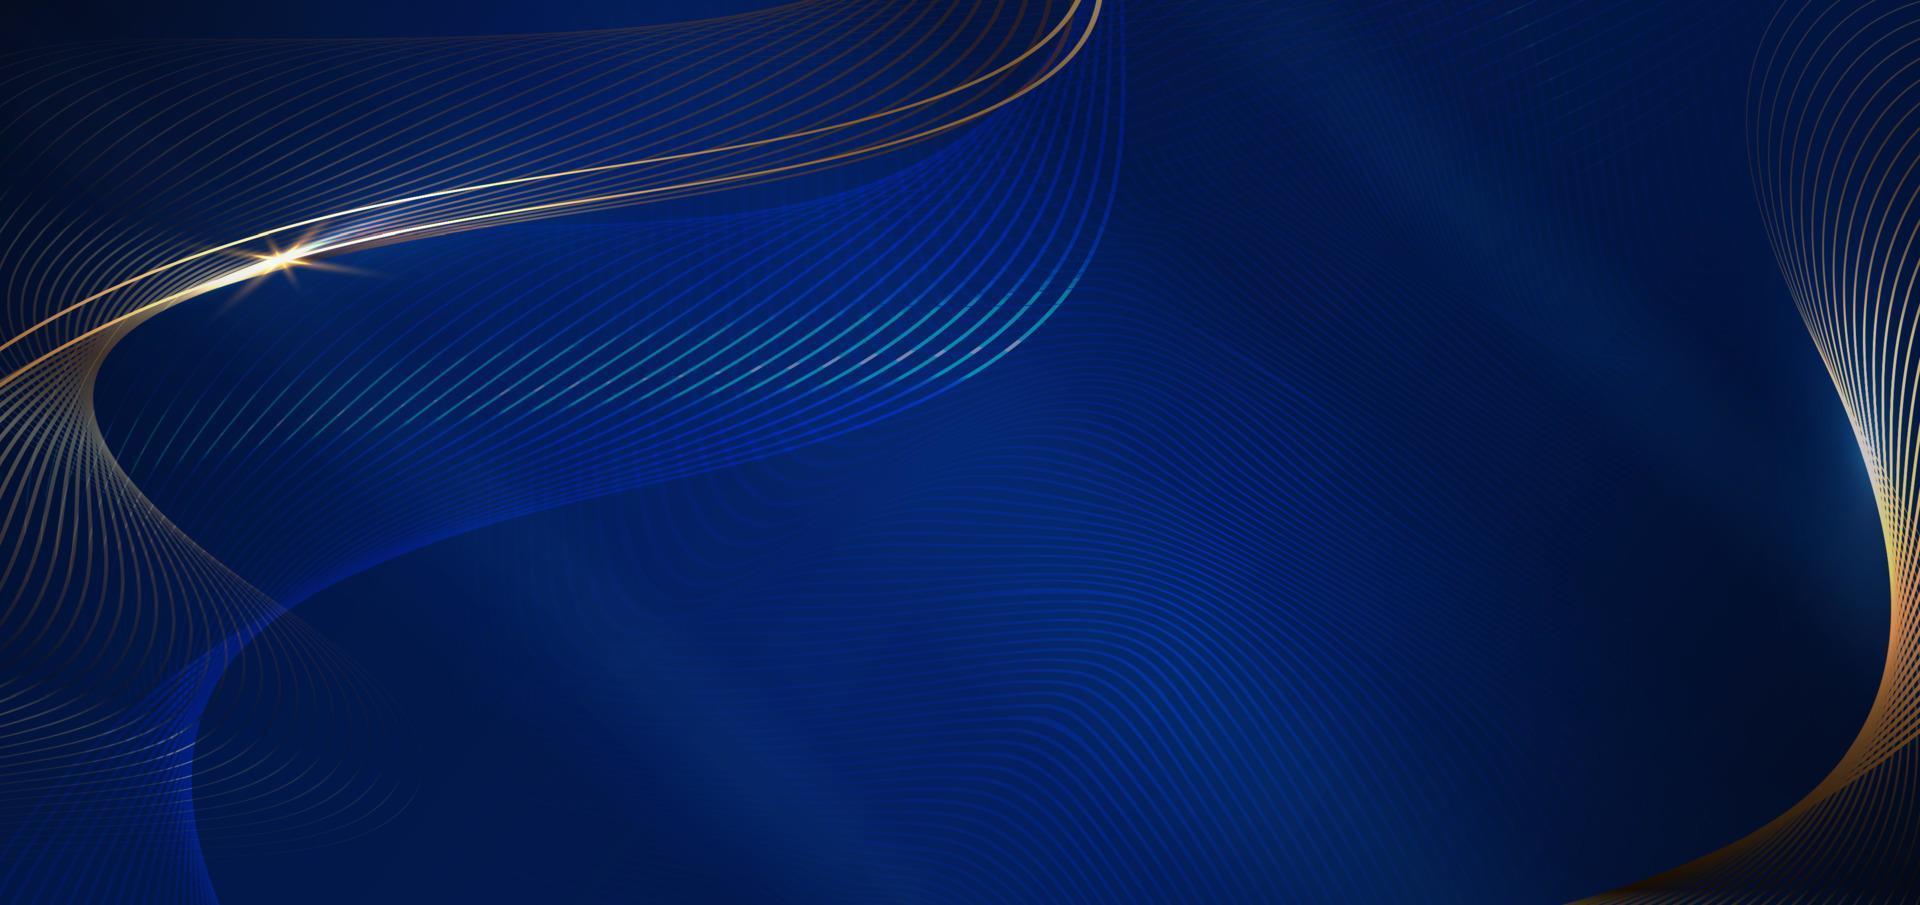 Abstract luxury golden lines curved overlapping on dark blue background. Template premium award design. vector